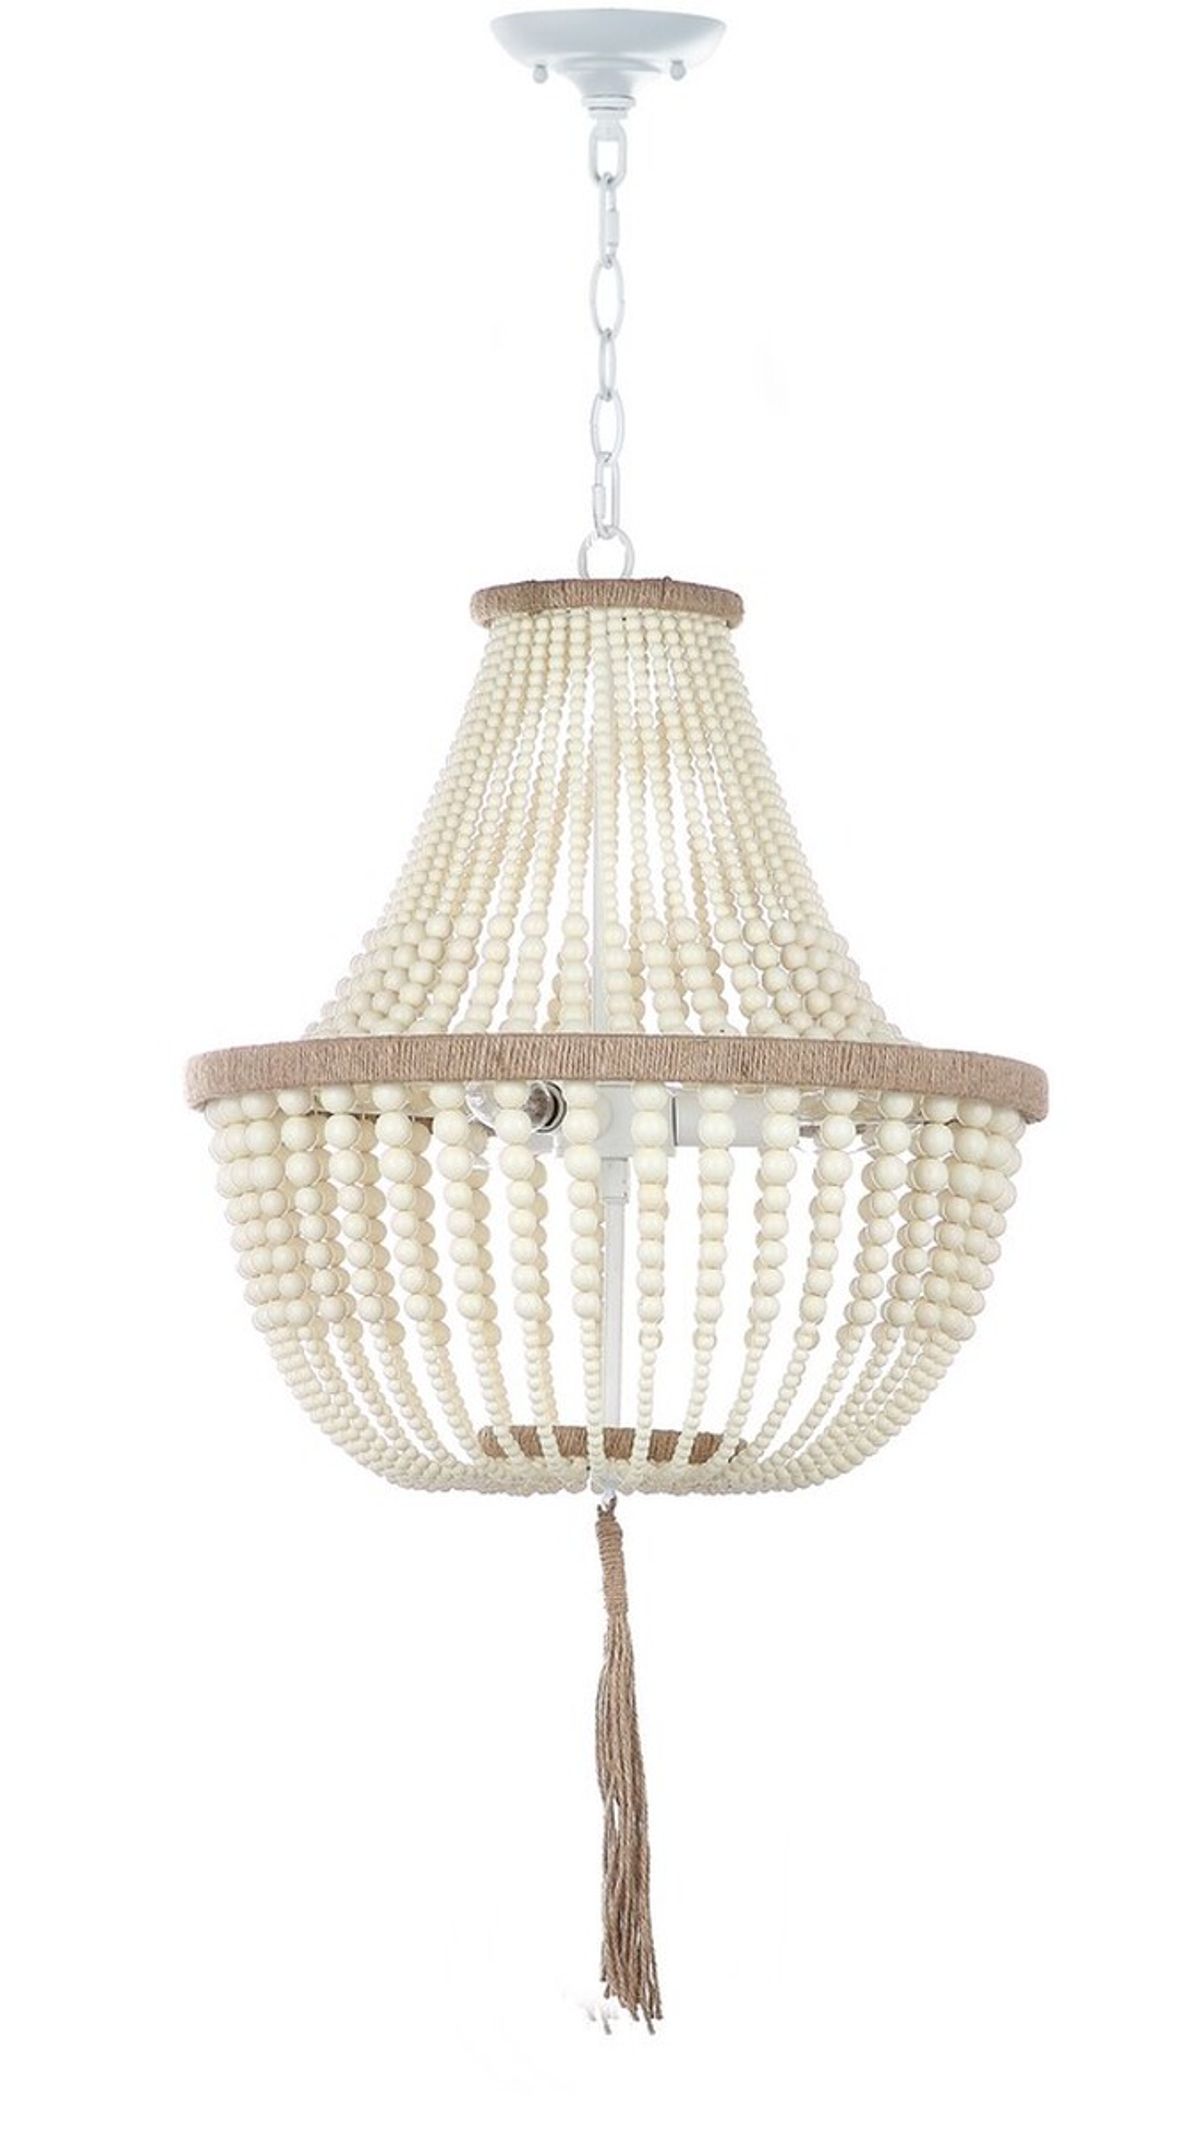 Shop 3 Light 16.5-Inch Dia Cream Beaded Pendant, 16.5" X 111.75" from Peggy Haddad Interiors Home on Openhaus